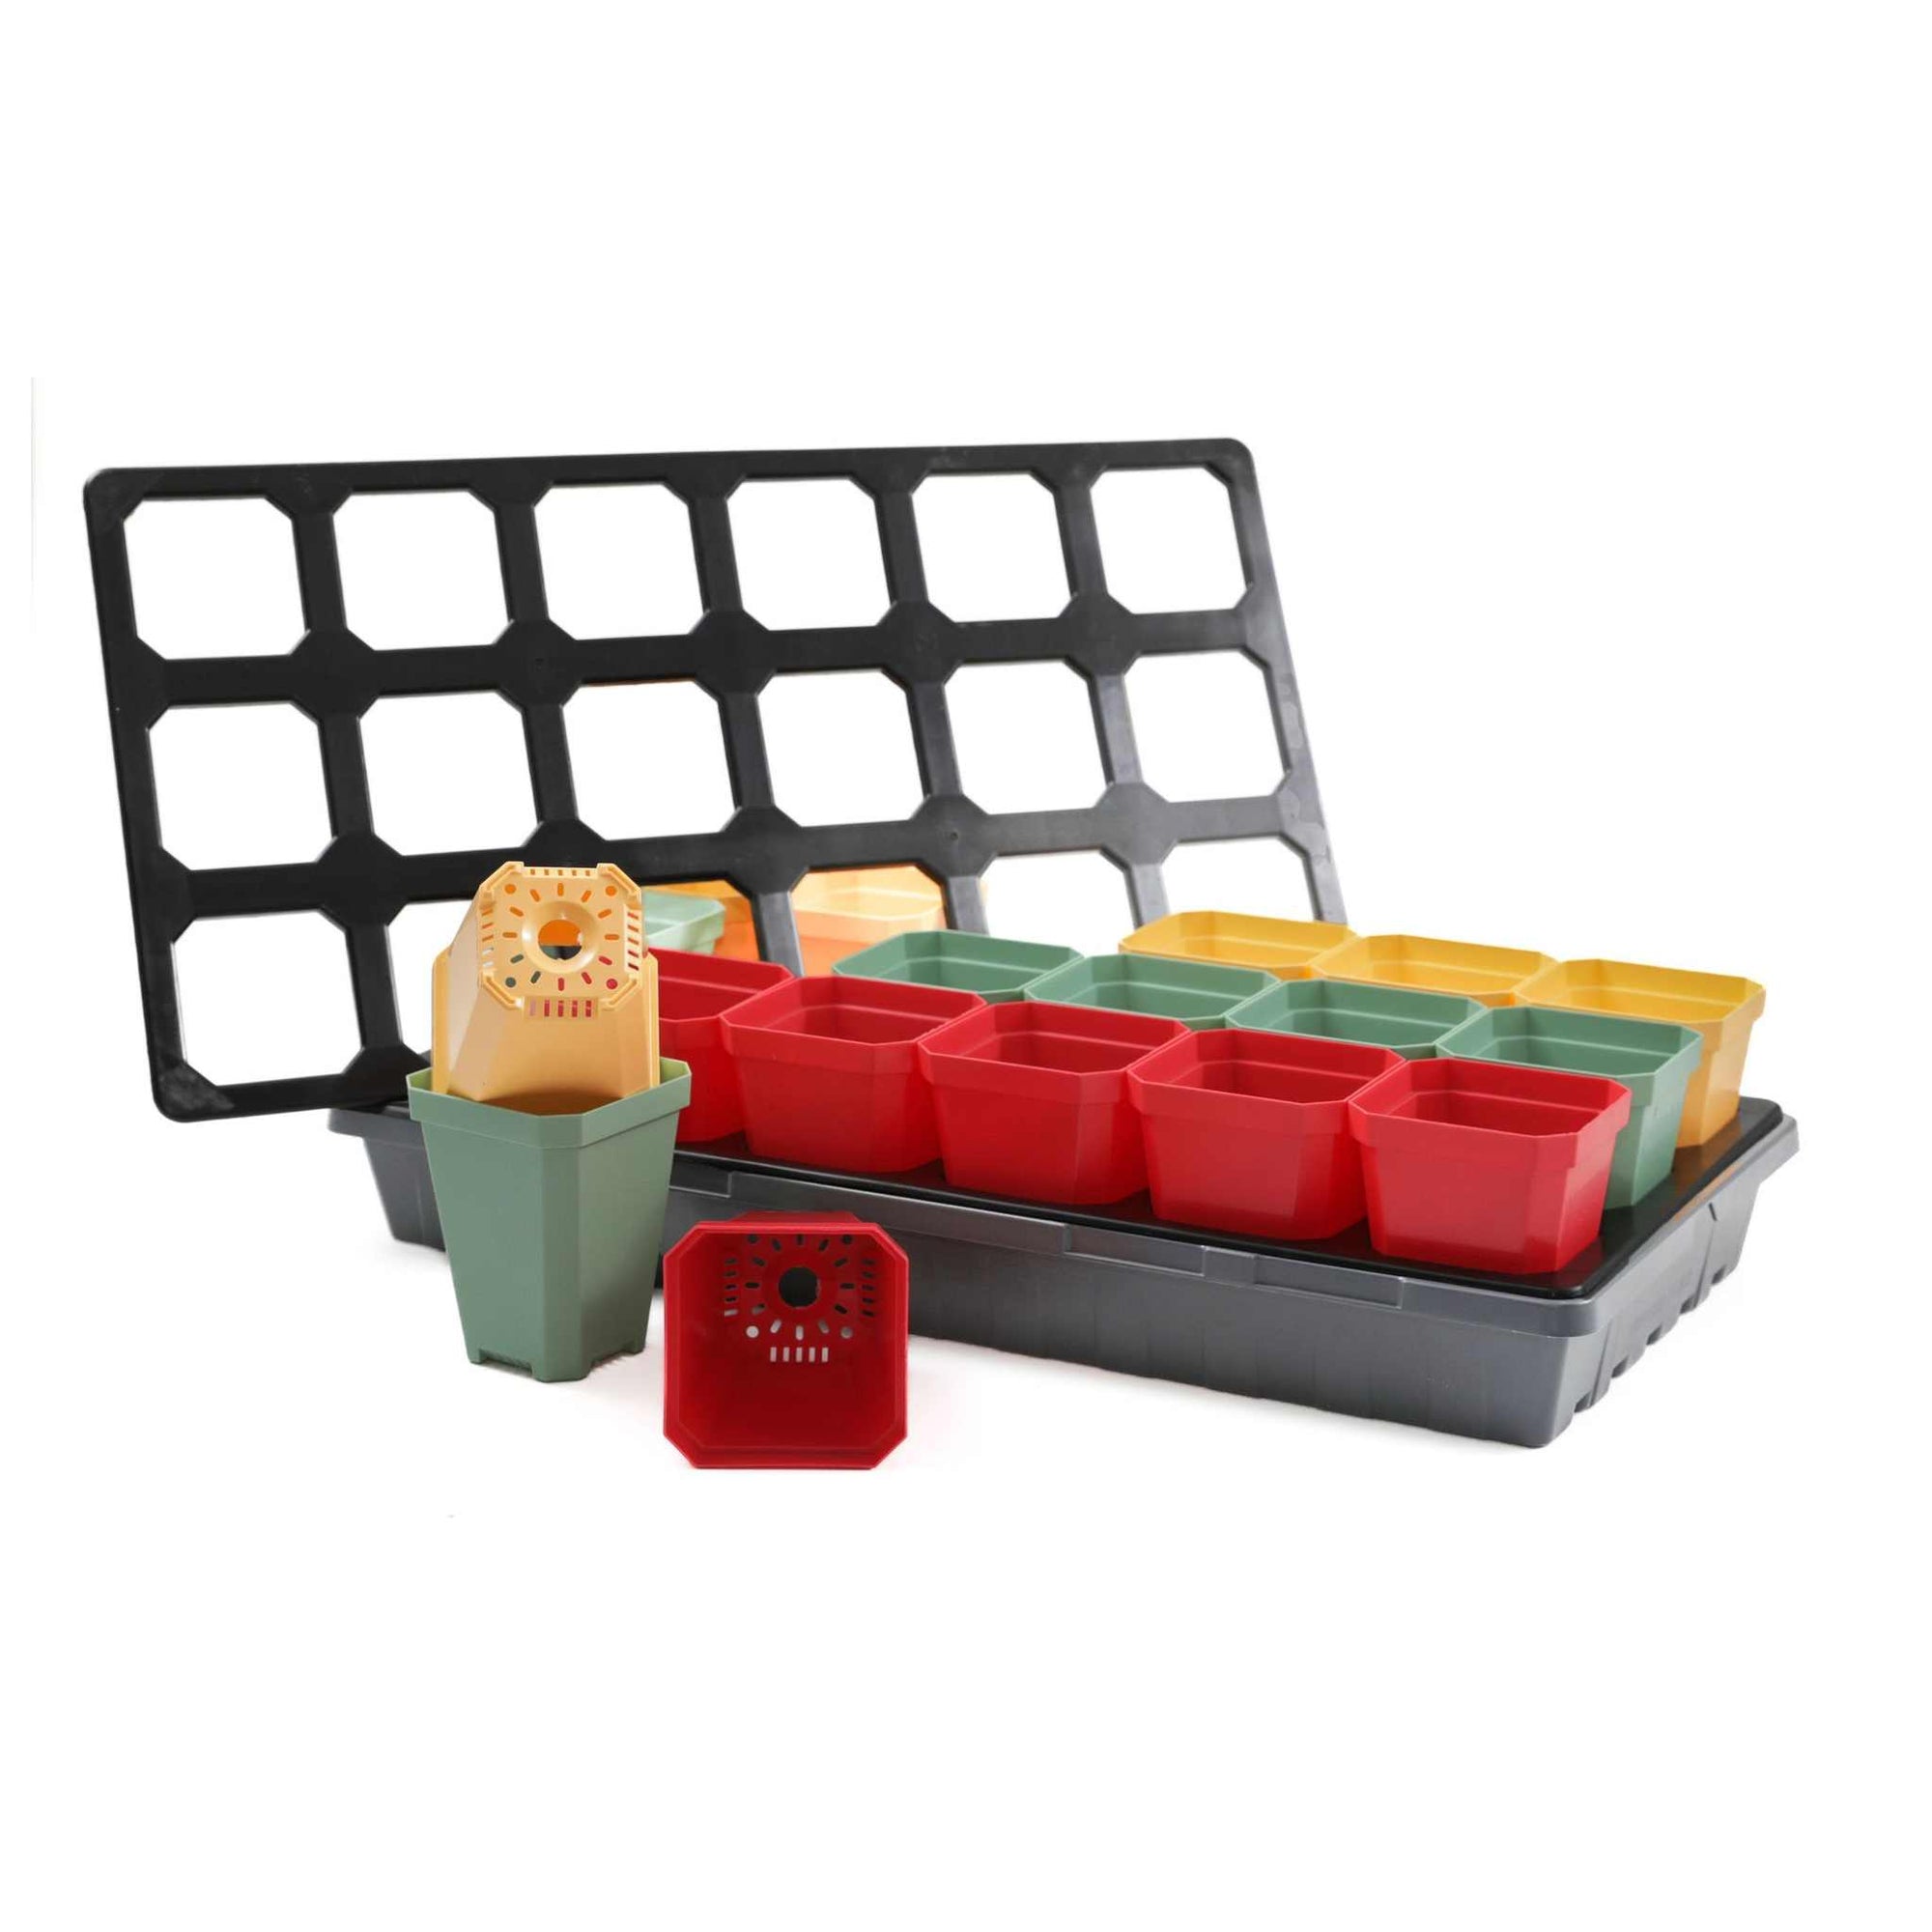 Pepper Geek Starter Kit with insert tray to hold 18 3 inch pots in red, green and yellow. 